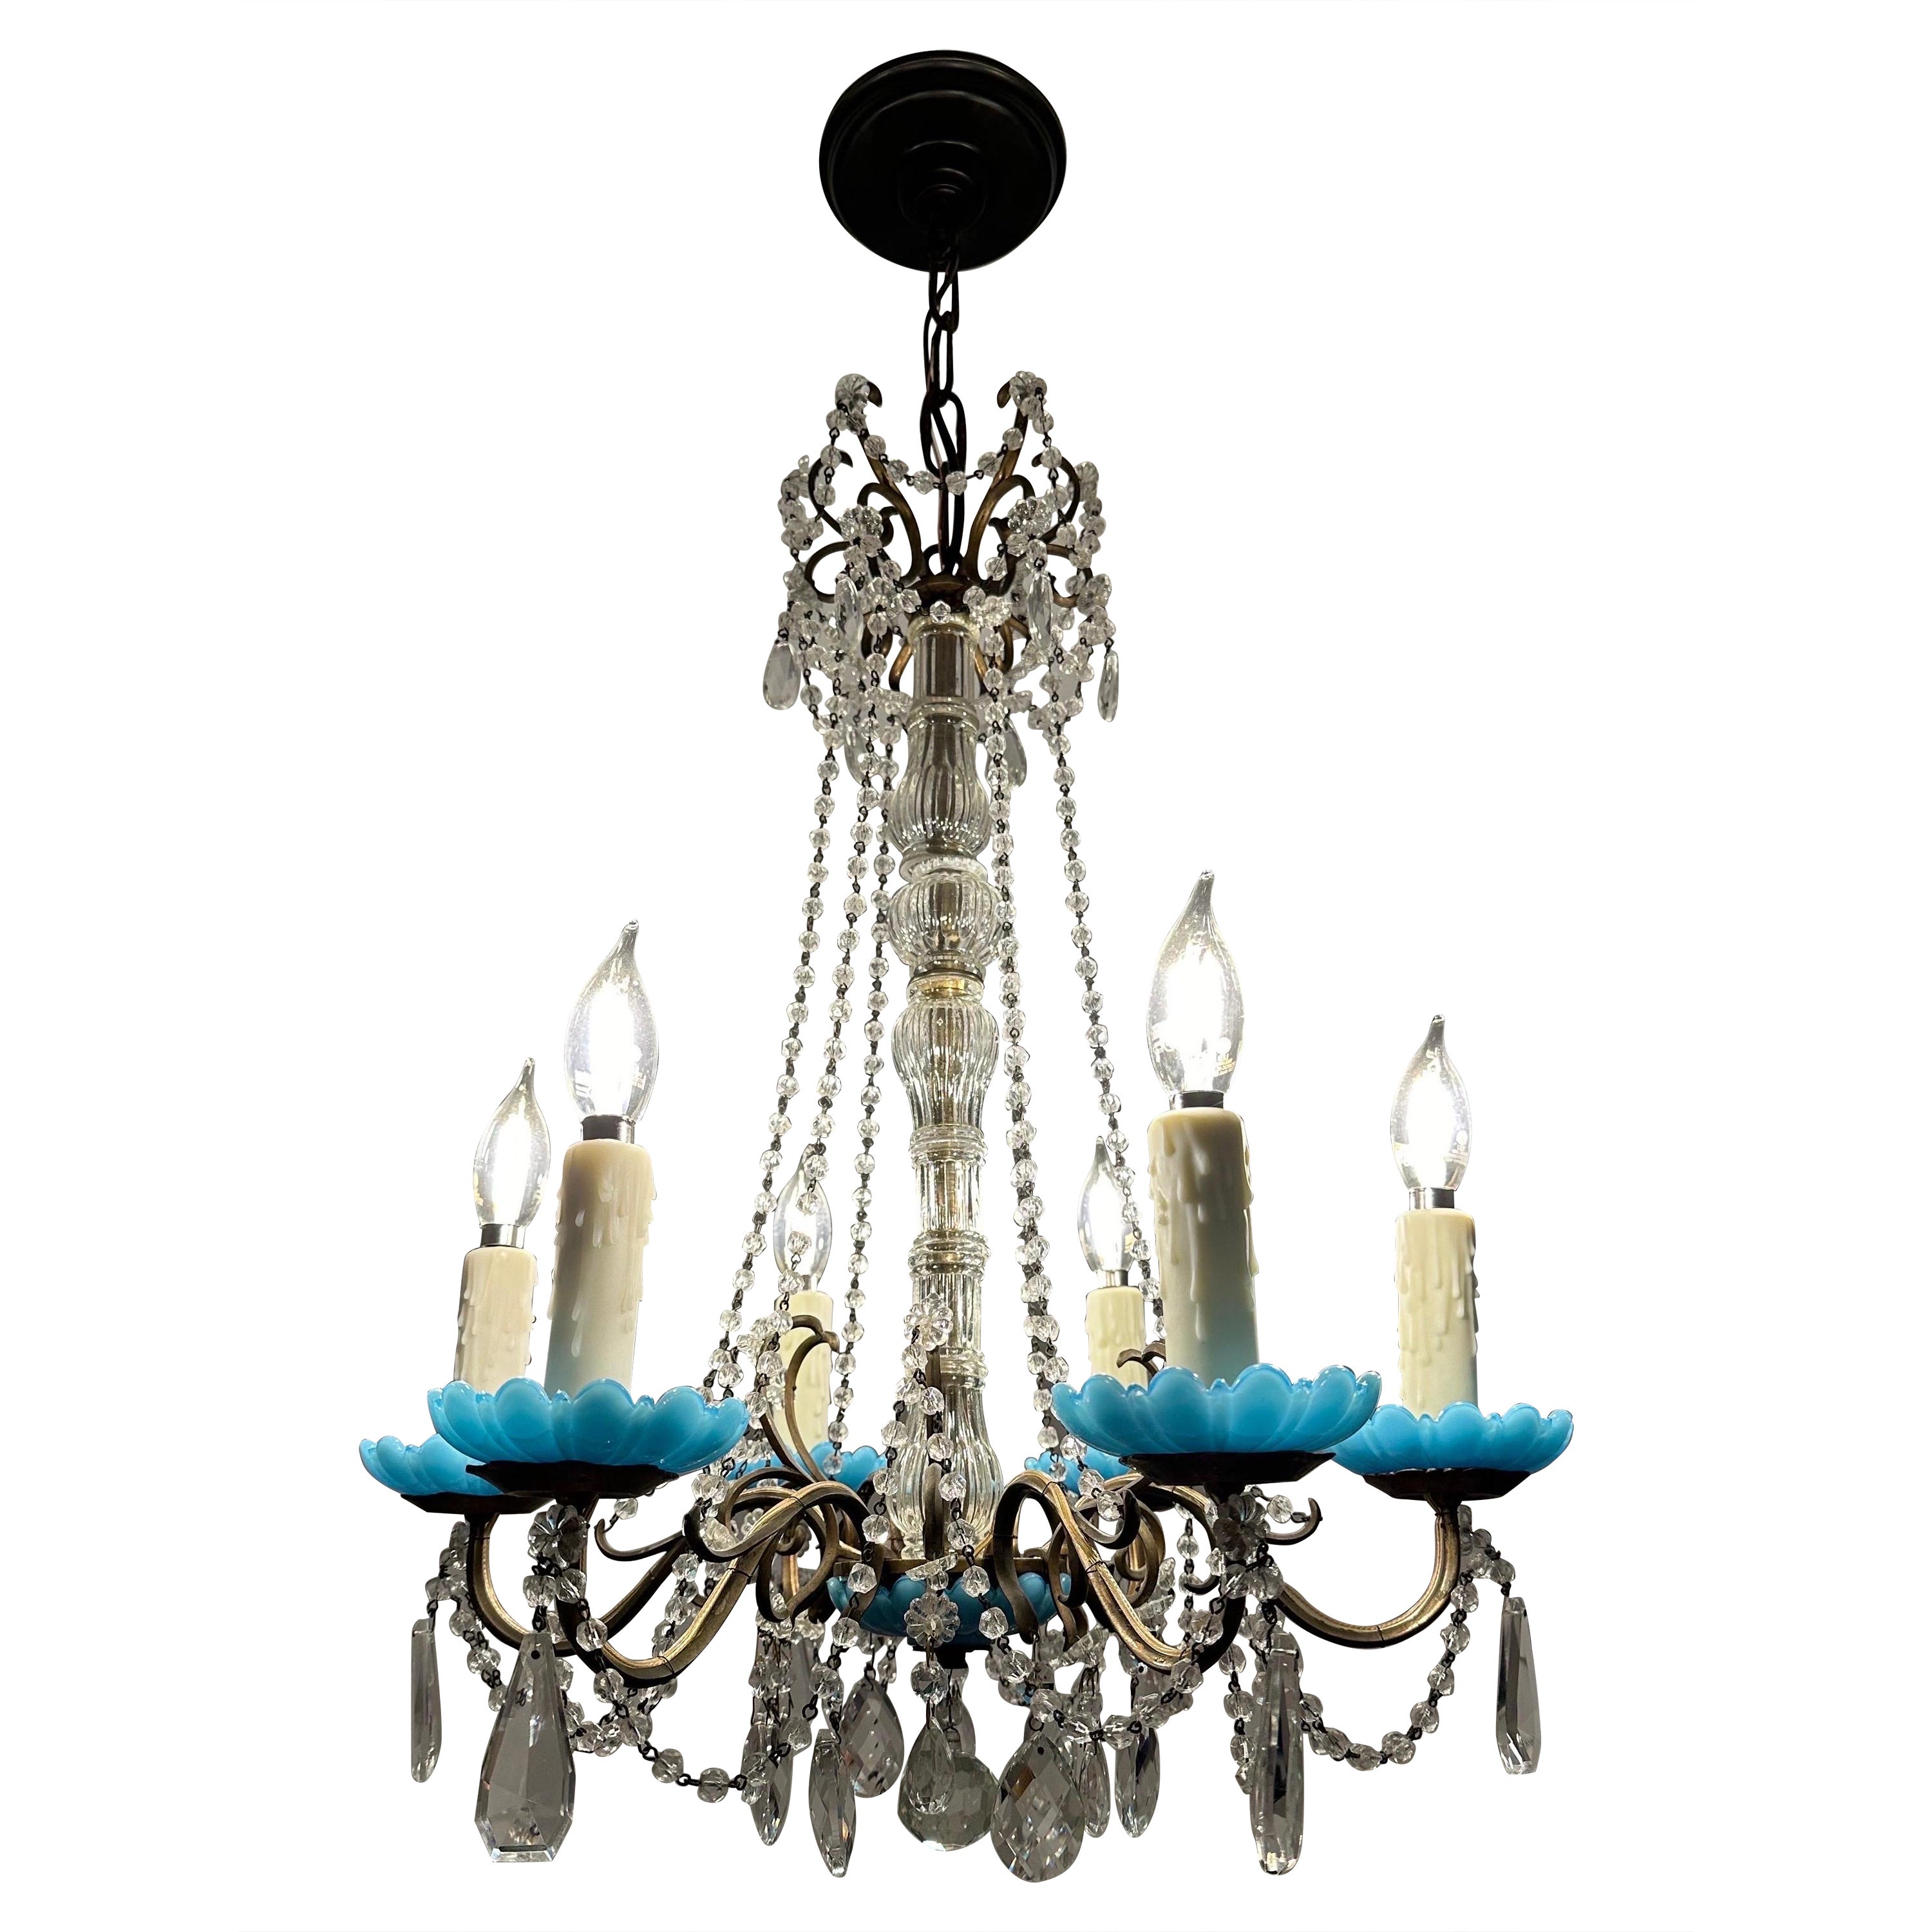 Rare and unique 18th century French crystal chandelier with blue accent.  For Sale